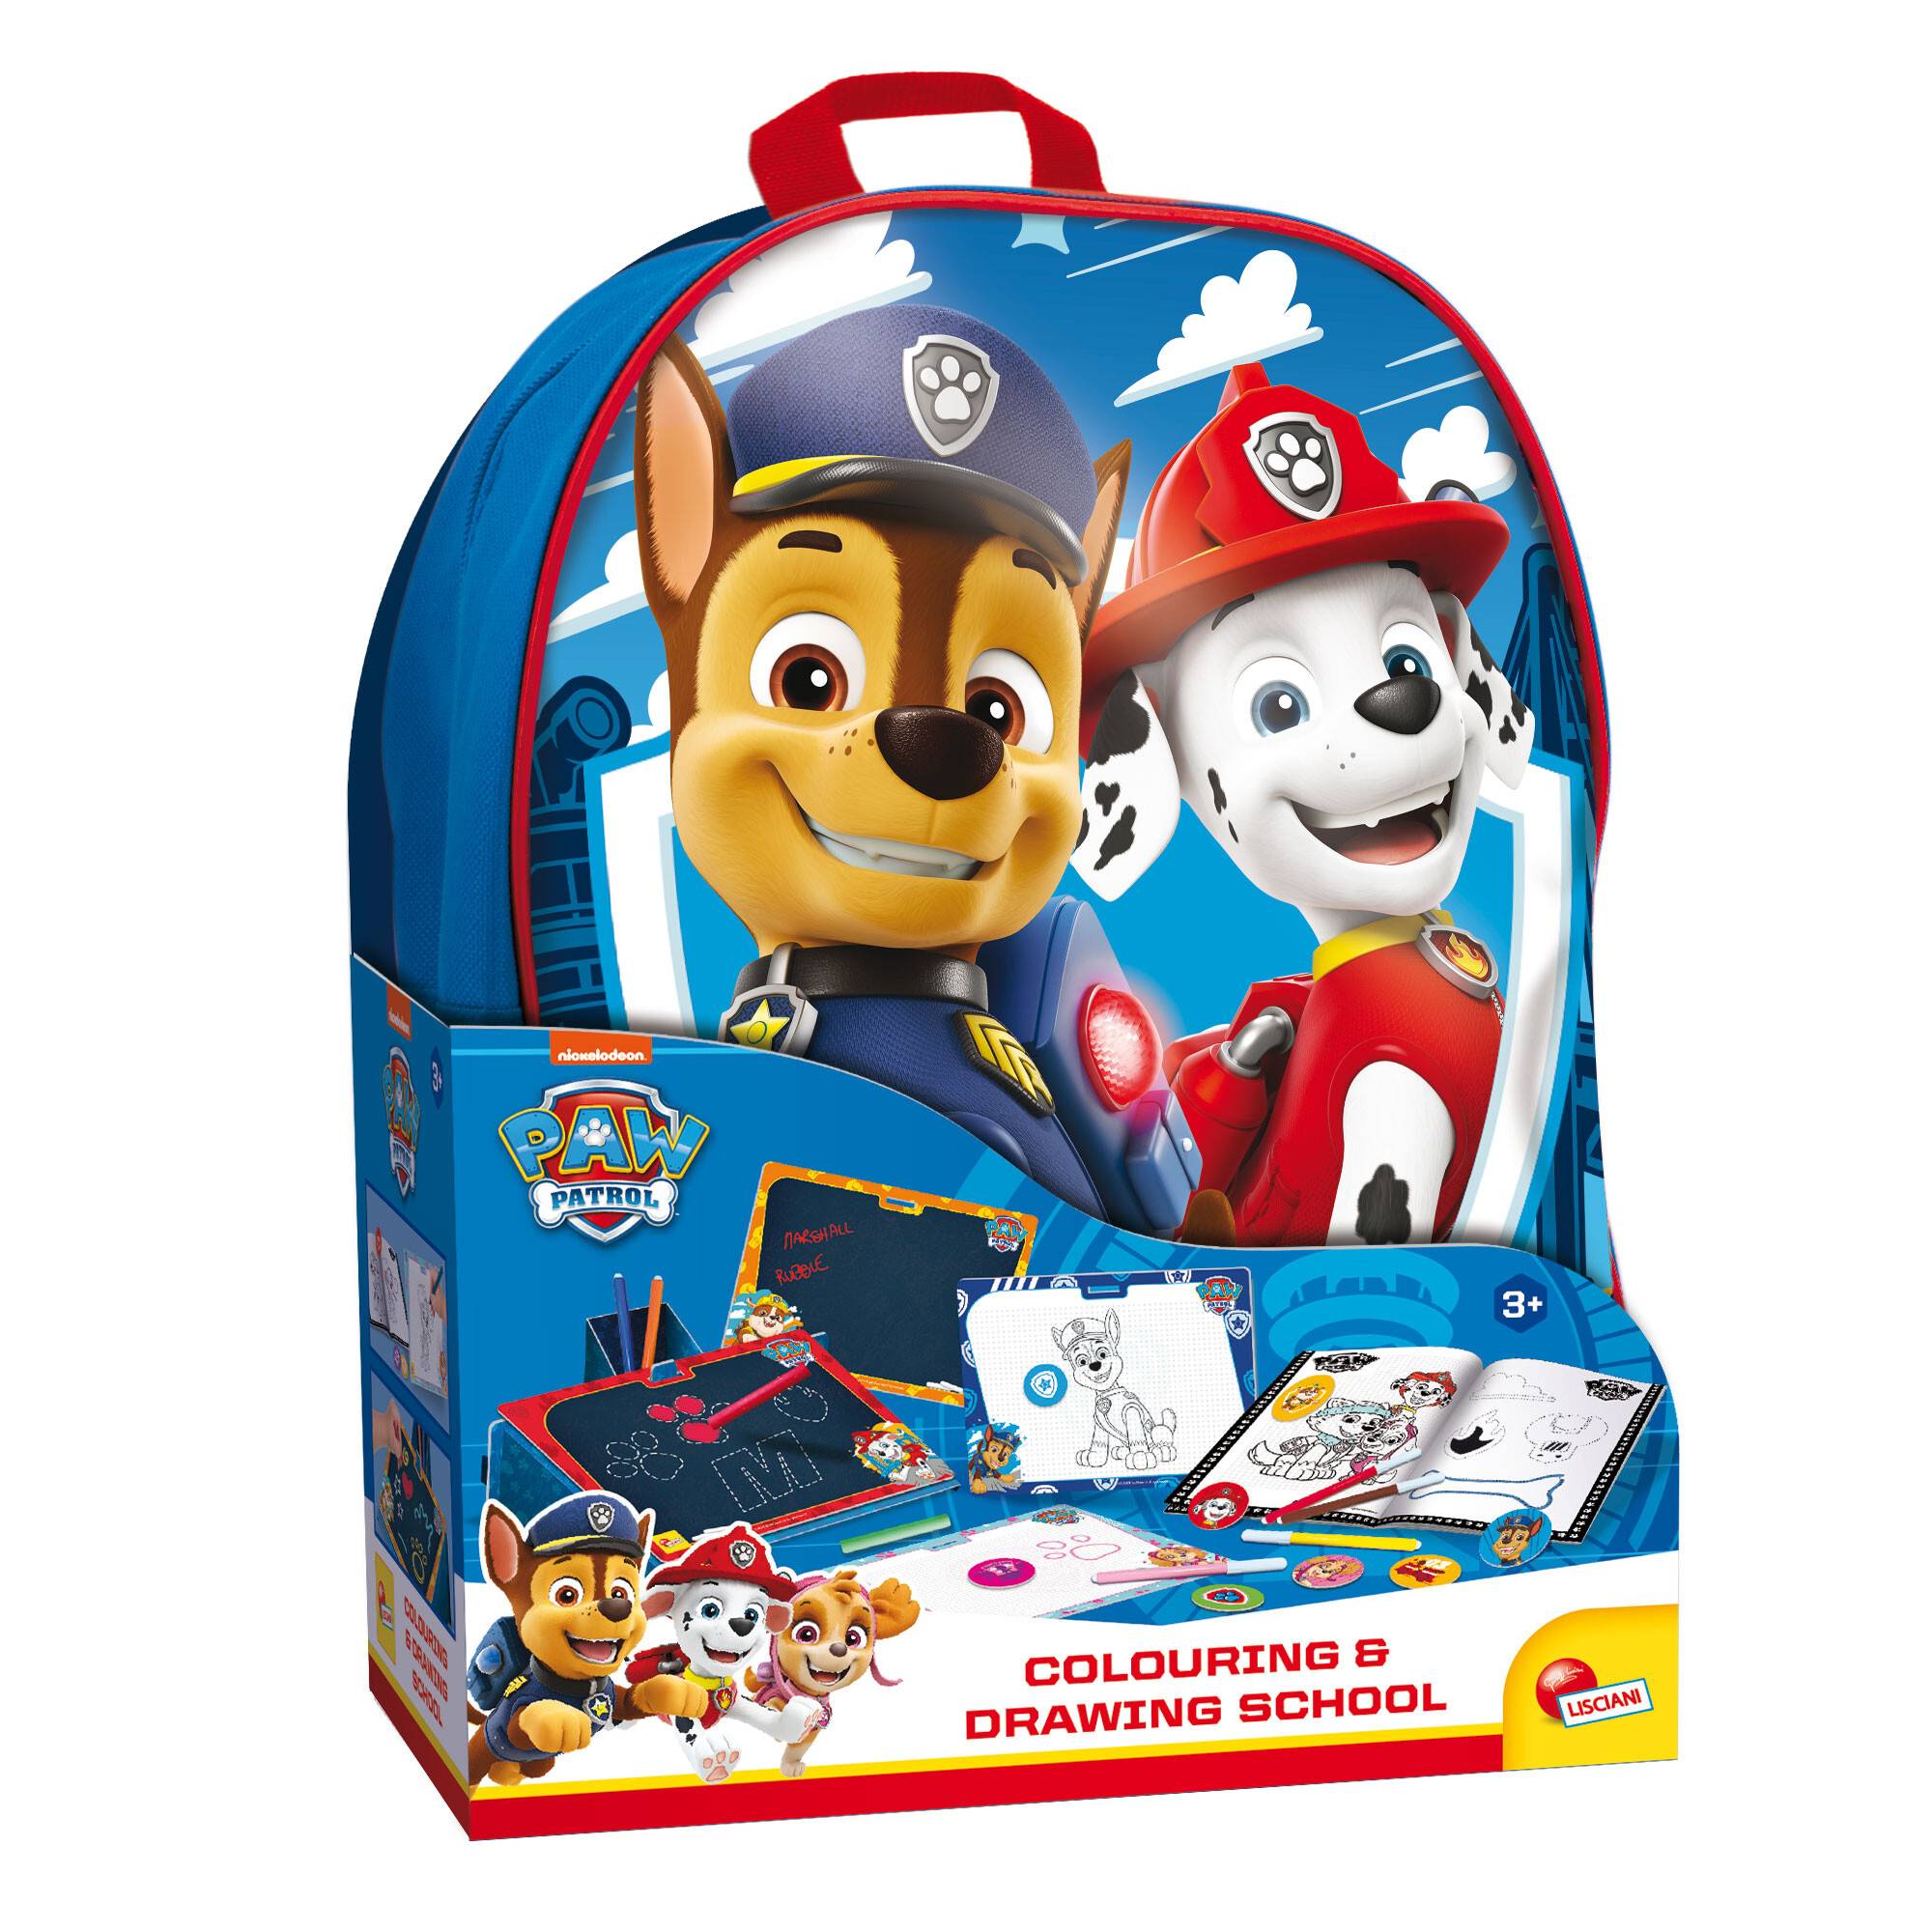 Paw patrol colouring & drawing school in a backpack - LISCIANI, Paw Patrol